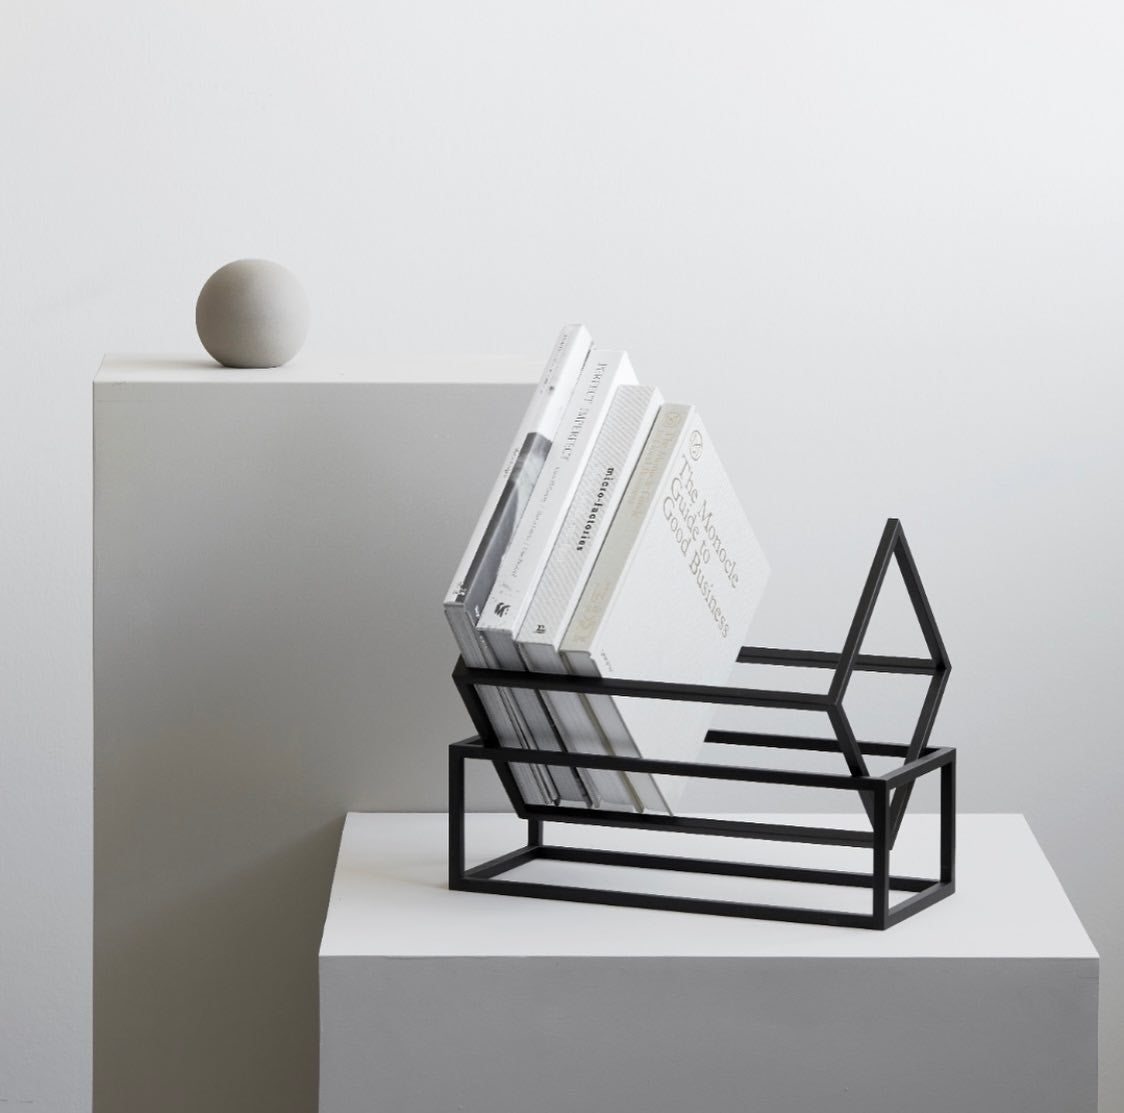 Sculptural yet functional – Kristina Dam’s BOOK KEEPER in its simplest form lets you keep your books in the most creative way. 
.
.
#book #books #bookkeeper #shelves #creativeways